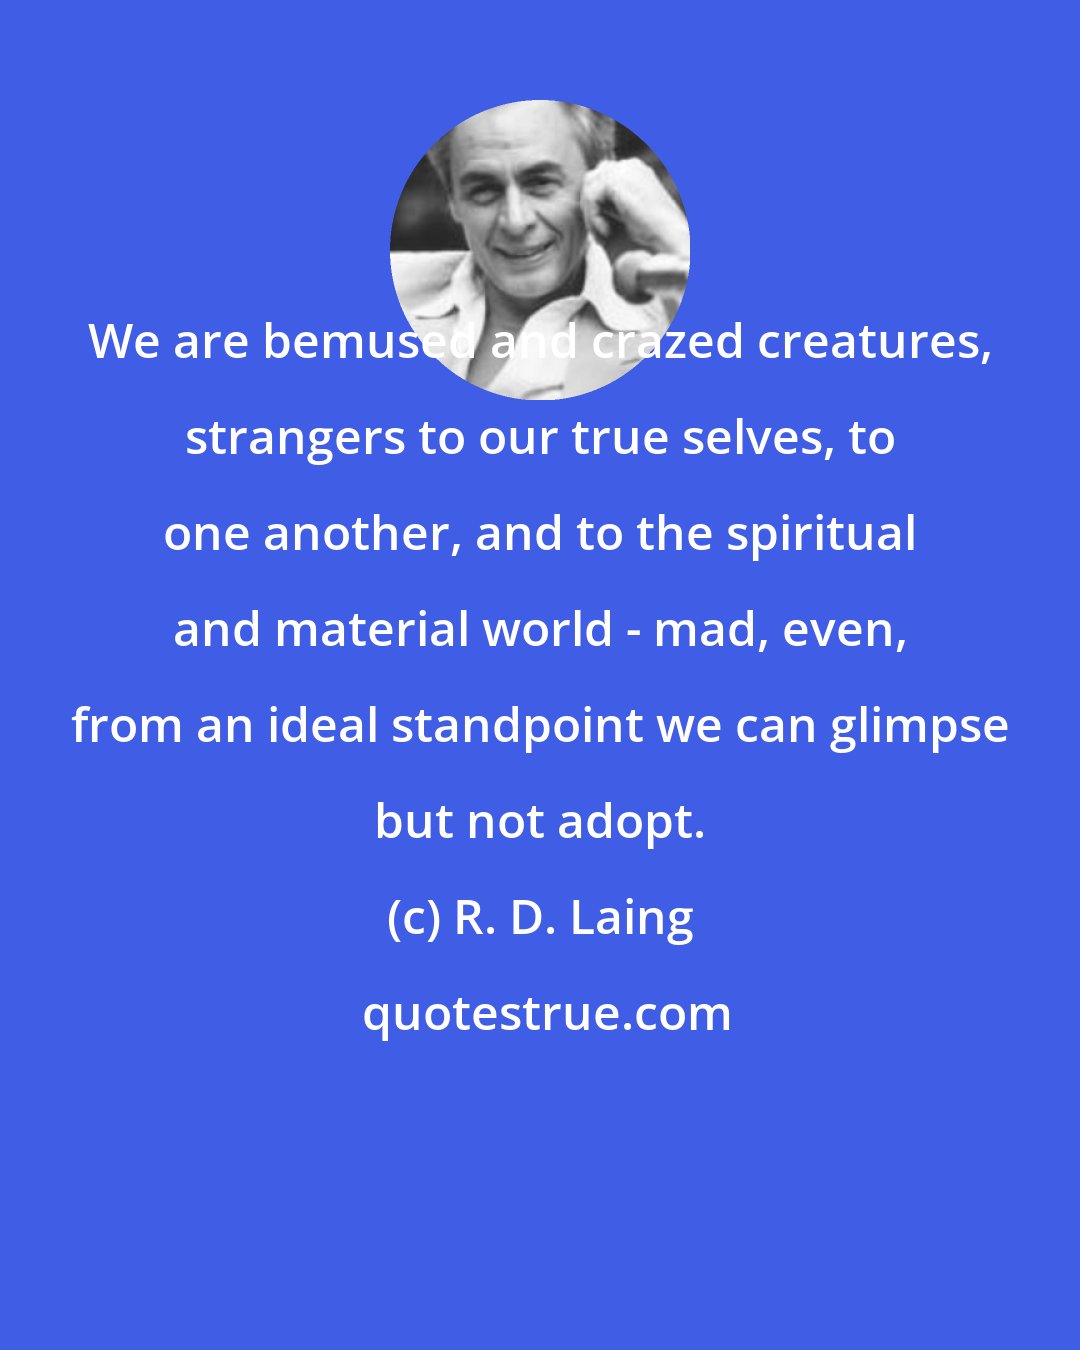 R. D. Laing: We are bemused and crazed creatures, strangers to our true selves, to one another, and to the spiritual and material world - mad, even, from an ideal standpoint we can glimpse but not adopt.